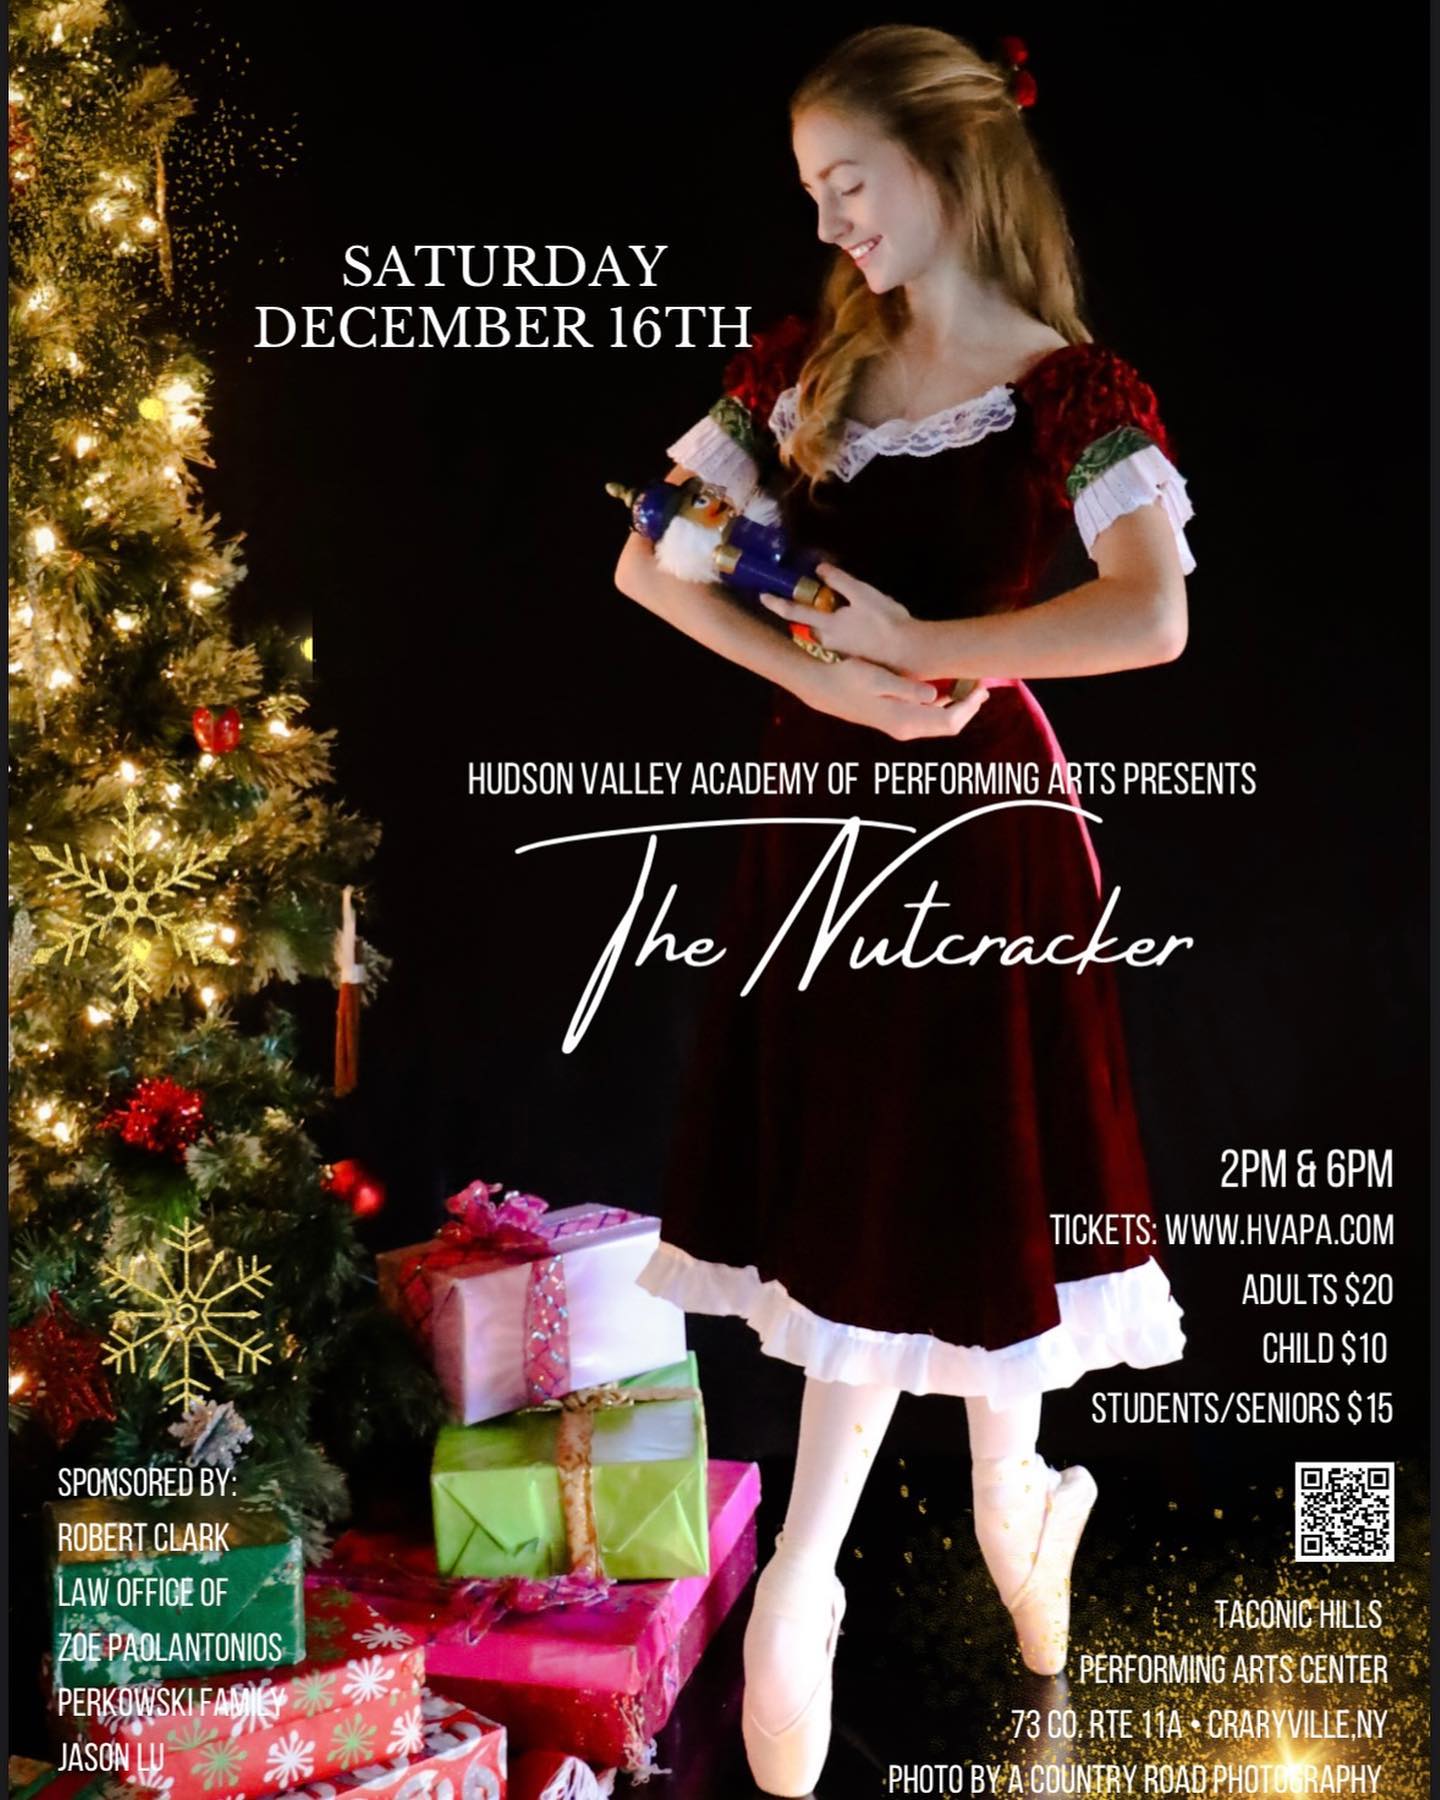 We are just 4 weeks away from Clara’s magical journey through the kingdom of the sweets!!

Get your tickets NOW by scanning the QR code or visiting our website at https://hvapa.com/nutcracker/